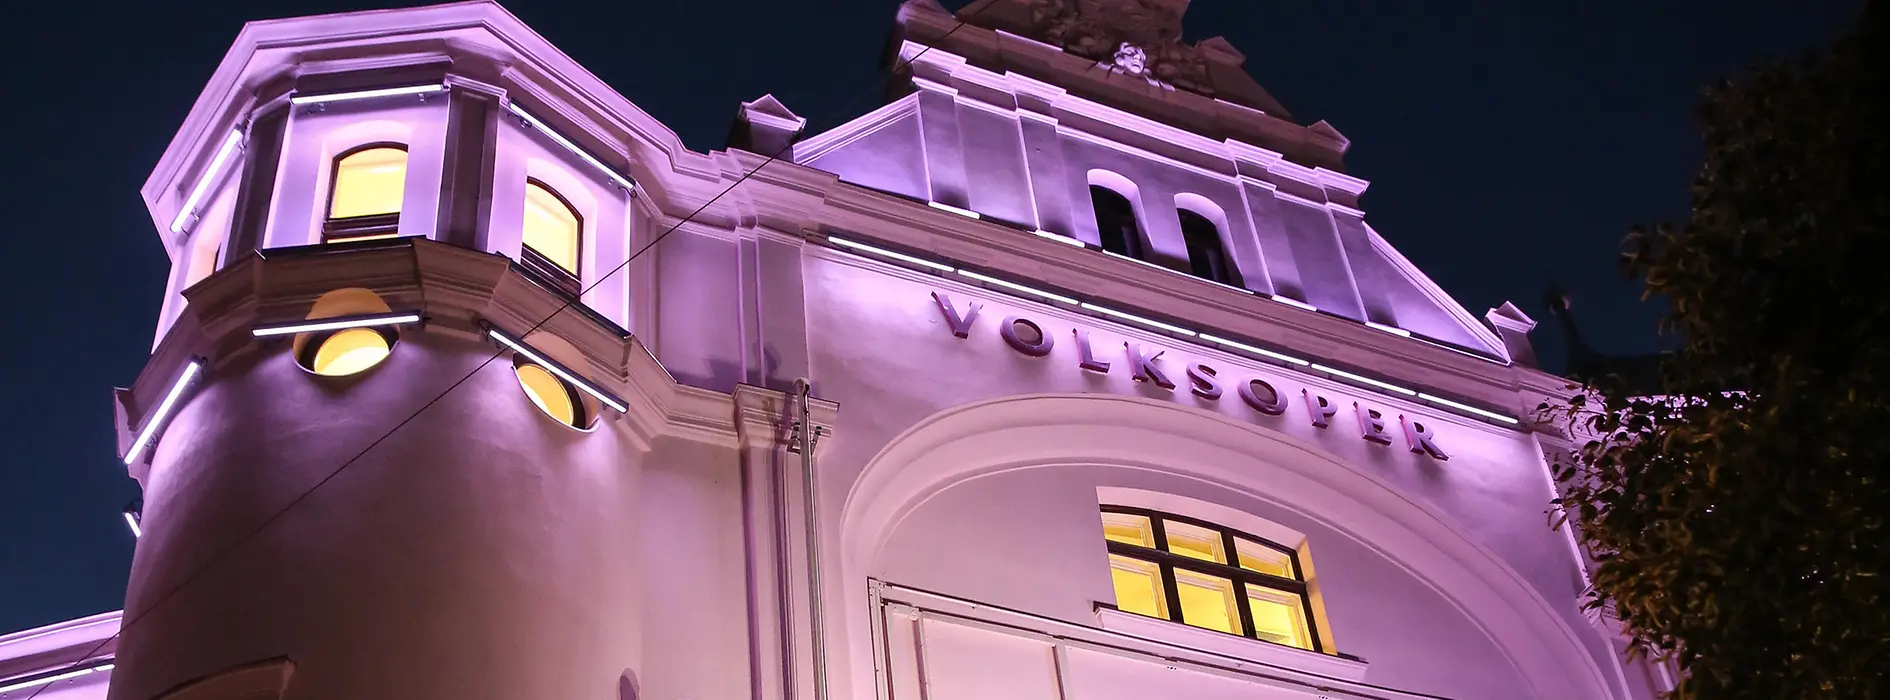 Volksoper Vienna, at night, building from outside